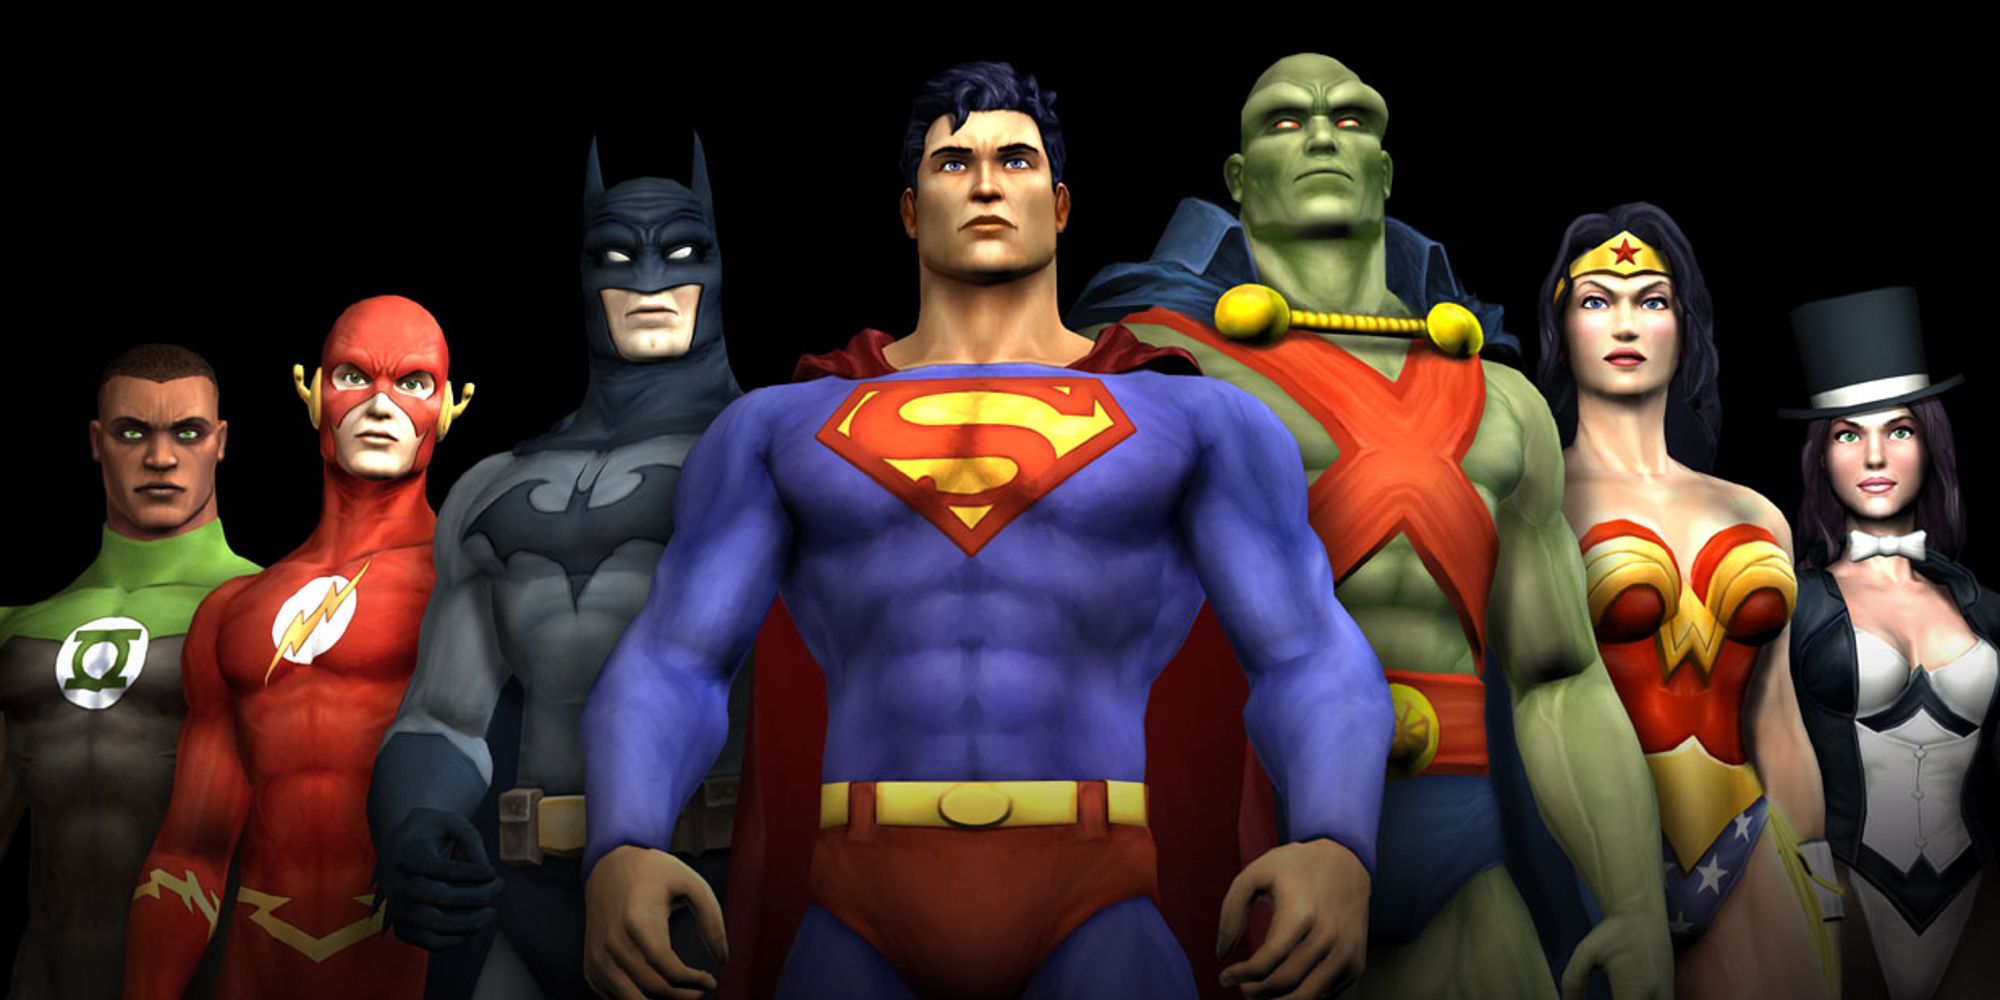 The Justice League lined up in promo image for Justice League Heroes